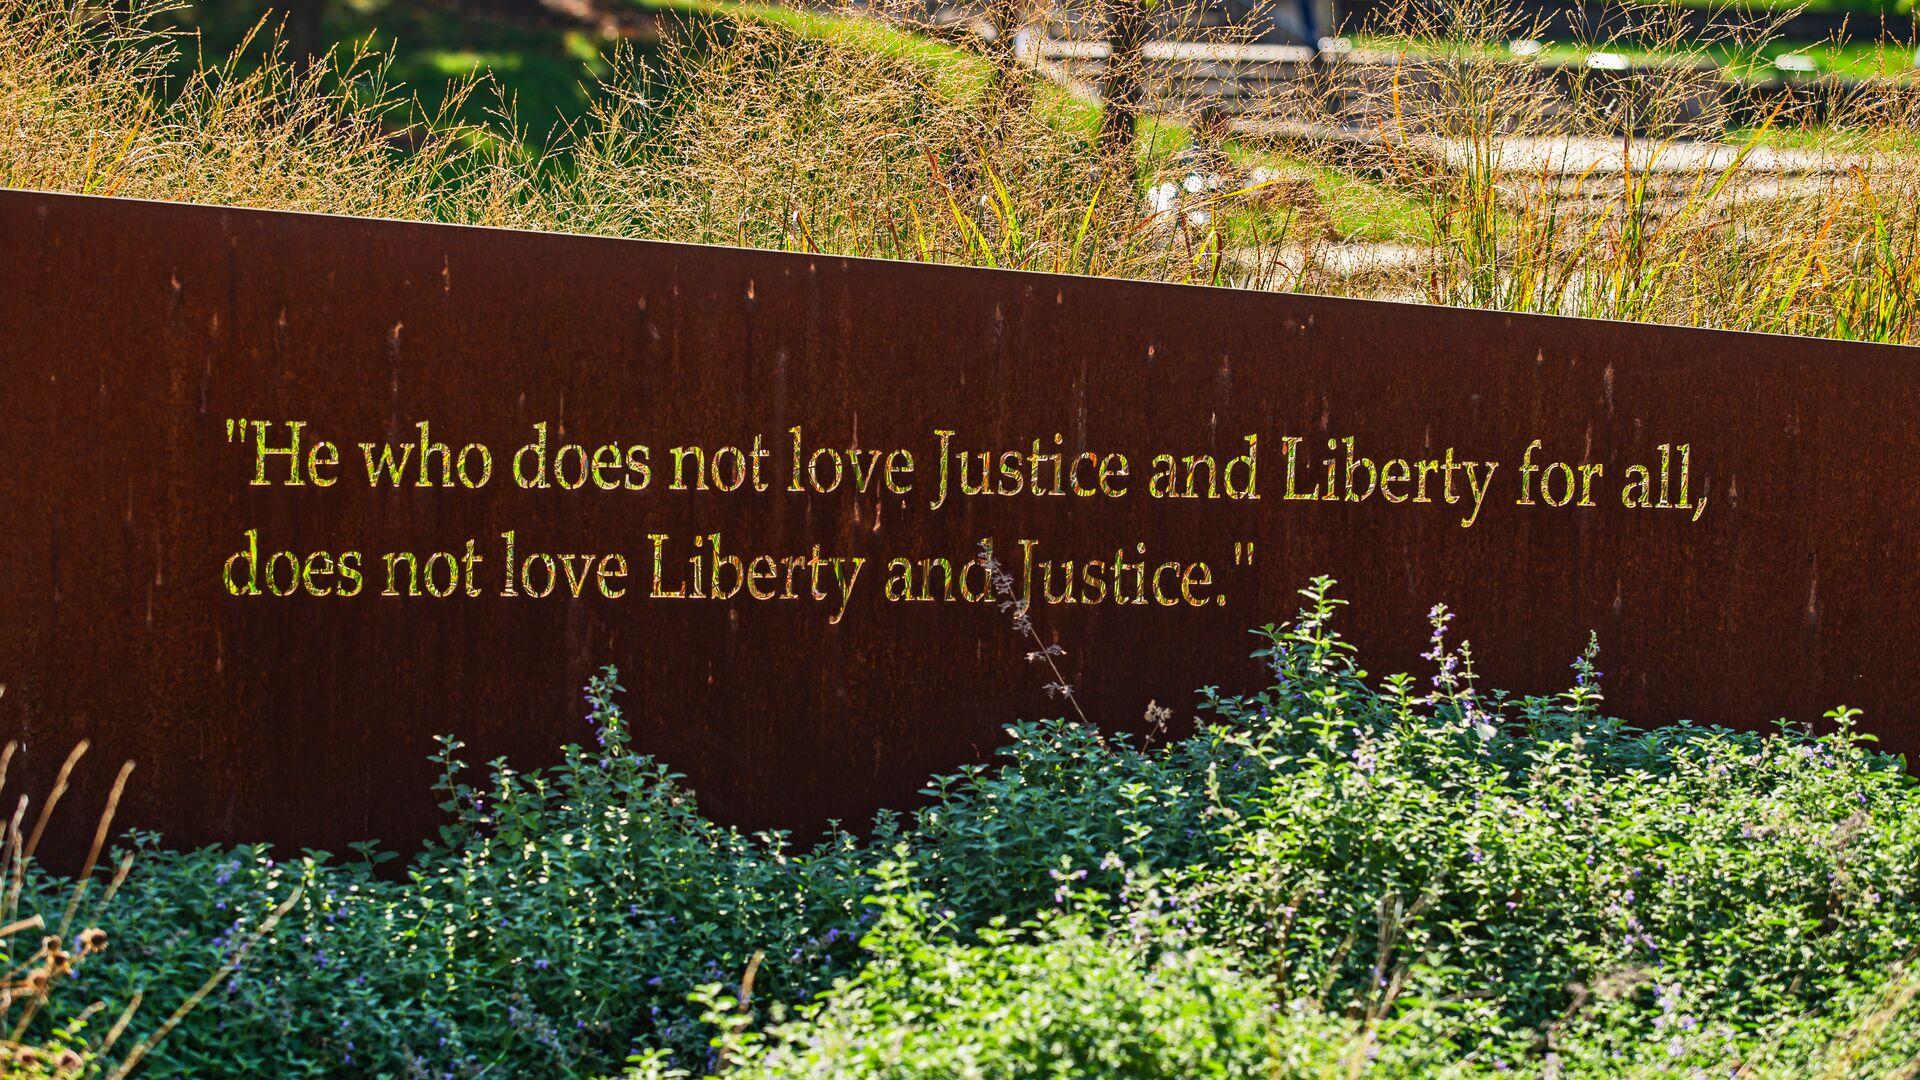 Quote inscribed into a wall: "He who does not love Justice and Liberty for all, does not love Liberty and Justice."